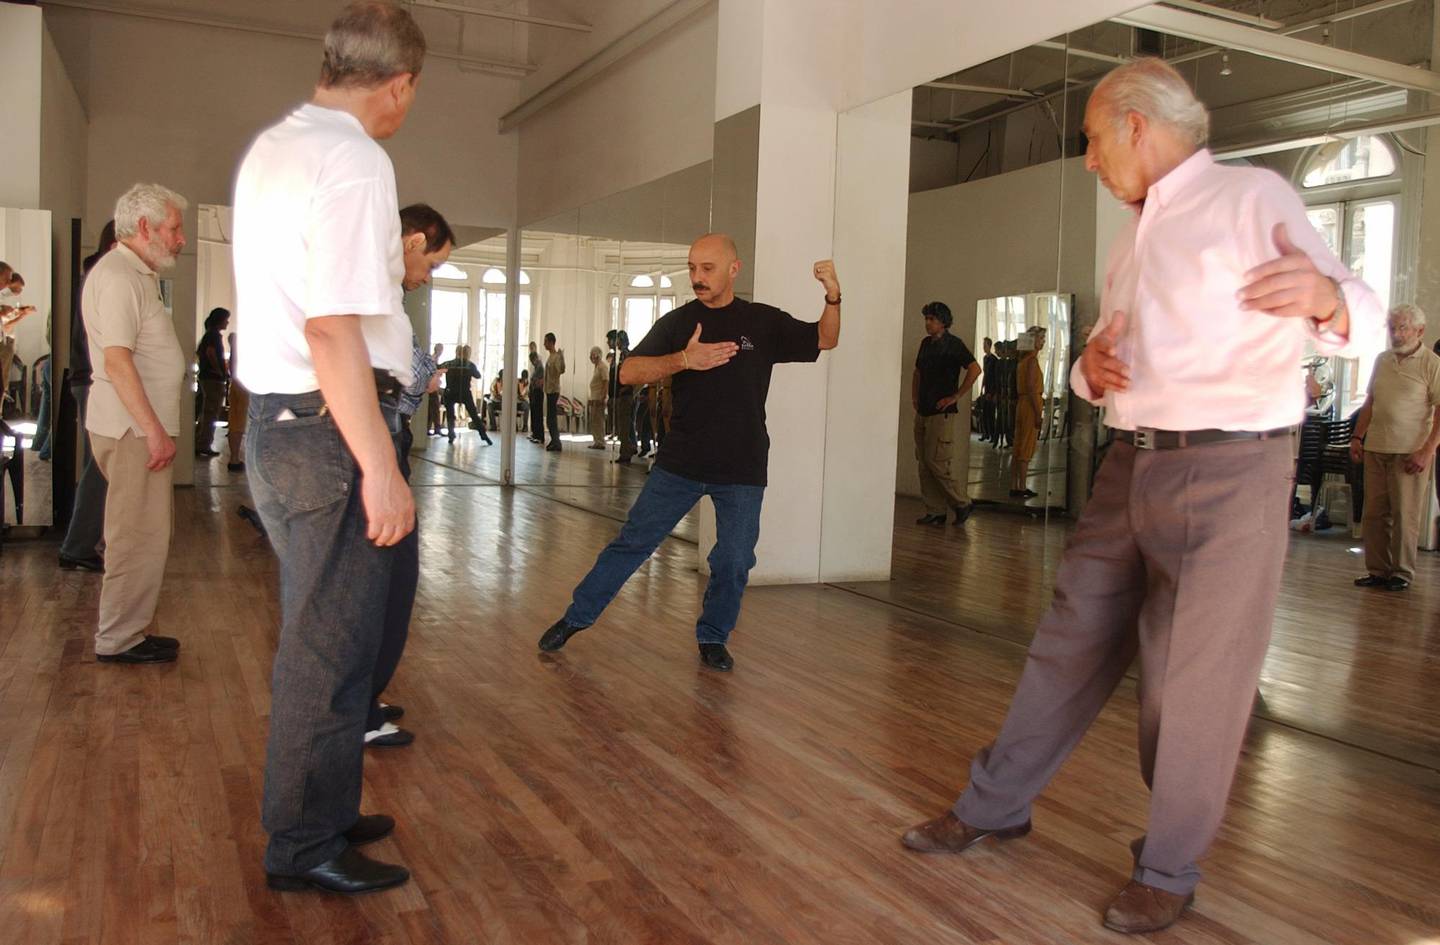 Tango instructor Jorge Firpo, center, shows students Jorge, right, and Irek, left,some steps during a class in the Argentine School of Tango in a shopping mall in Buenos Aires, Sept. 26, 2005. (AP Photo/Daniel Luna)